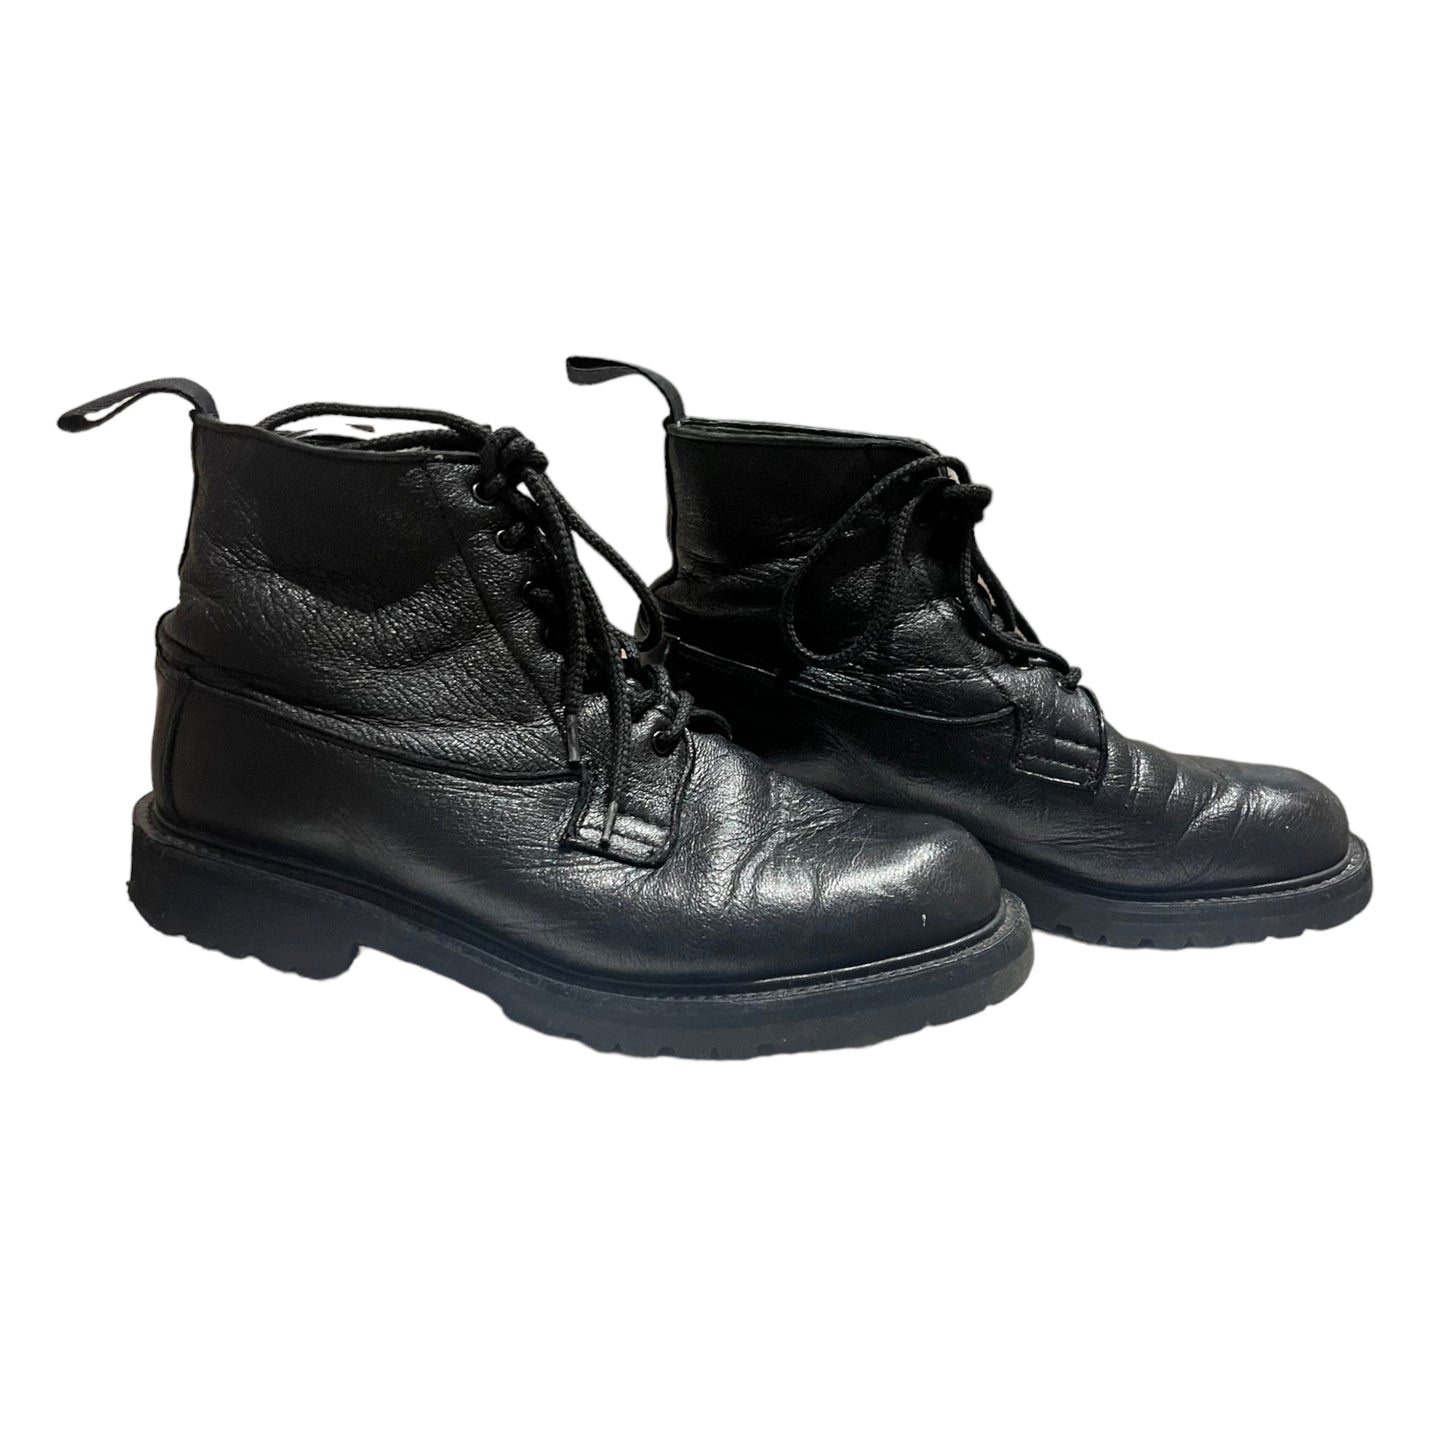 Tricker's Black Handmade Lace Up Boots